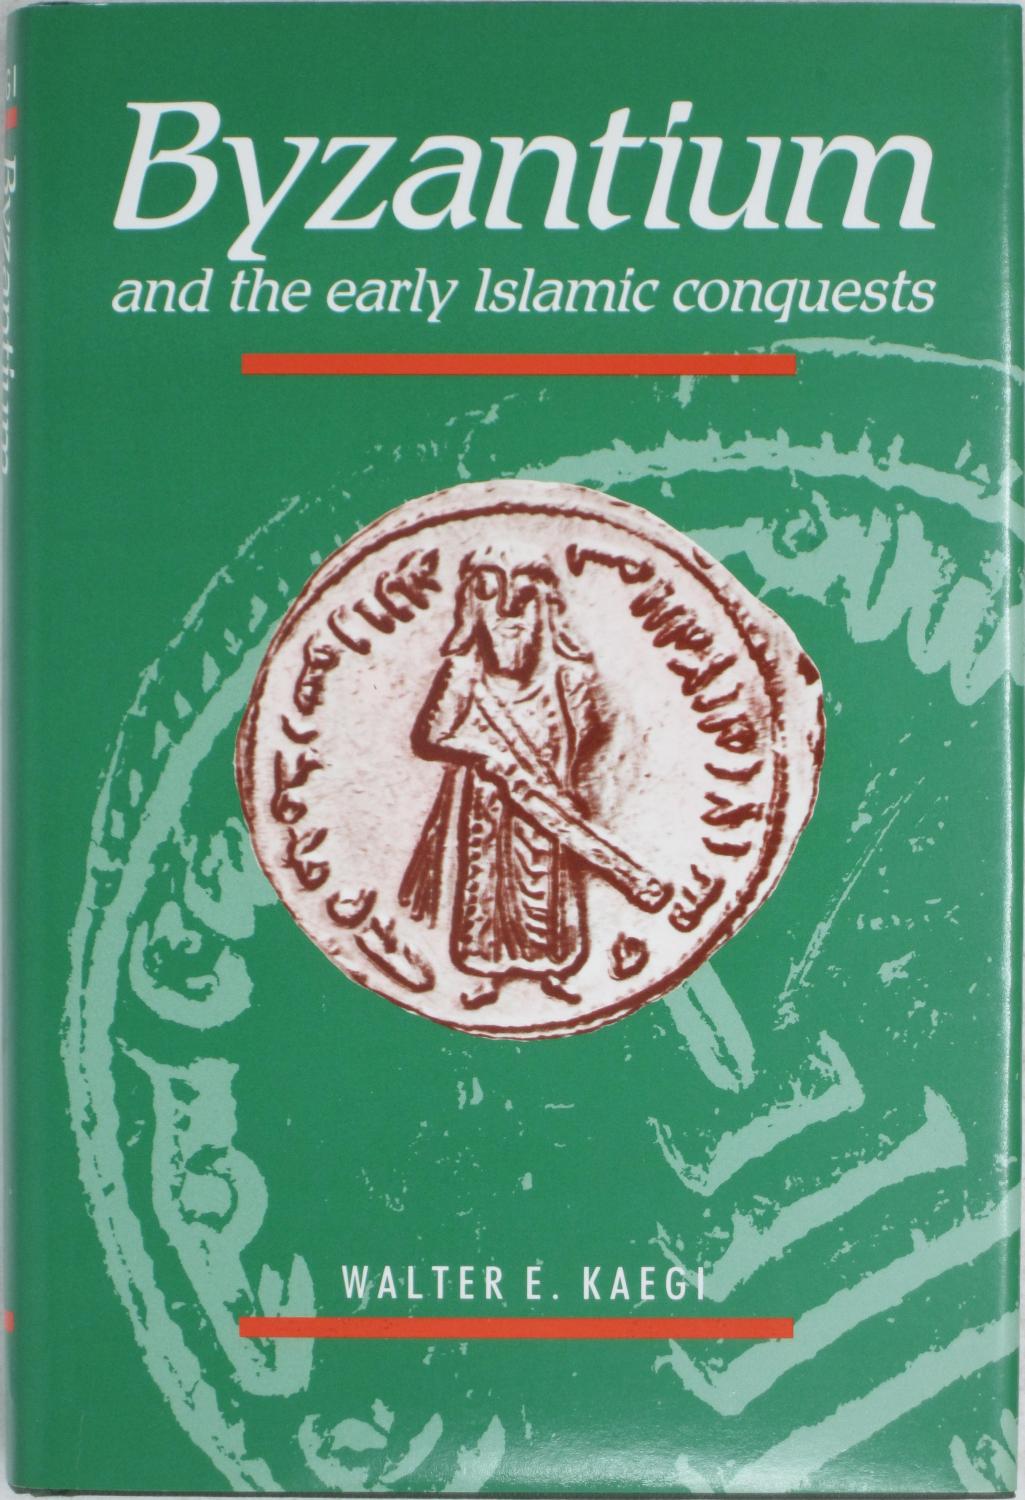 Byzantium and the Early Islamic Conquests - Kaegi, Walter E.